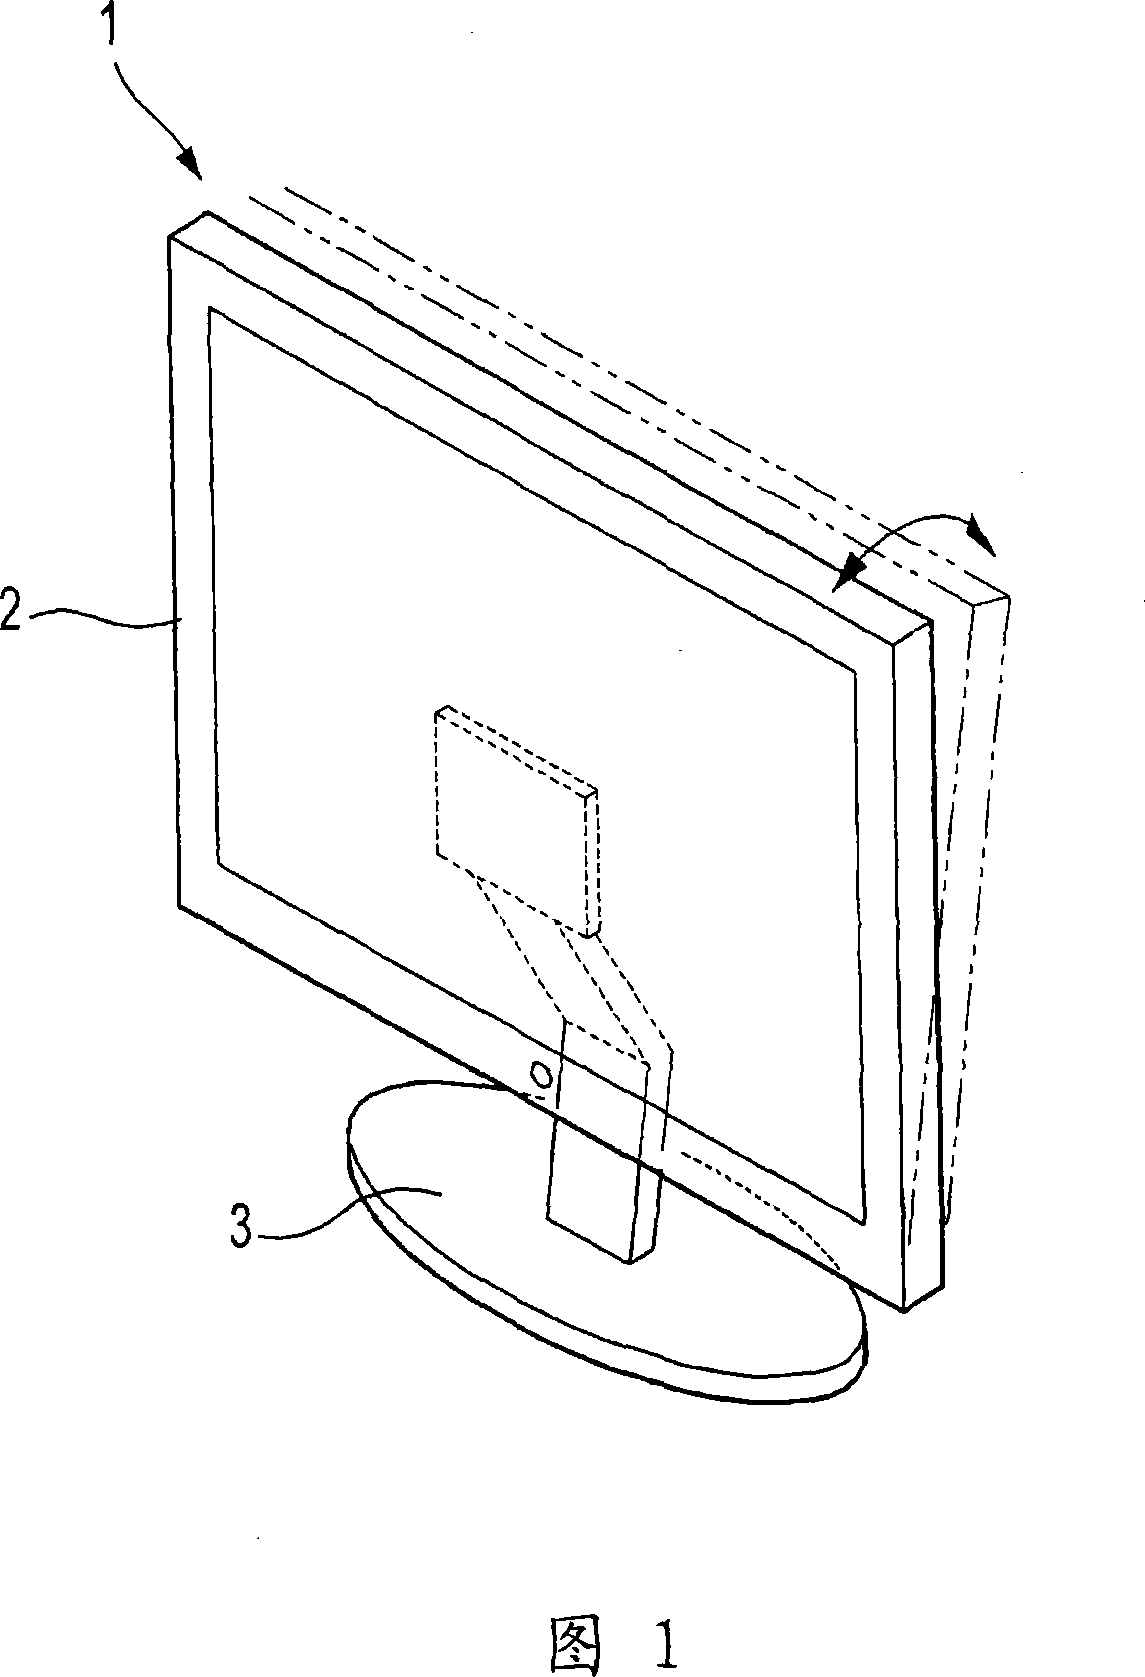 System and method for measuring the degree of wobble of image display device